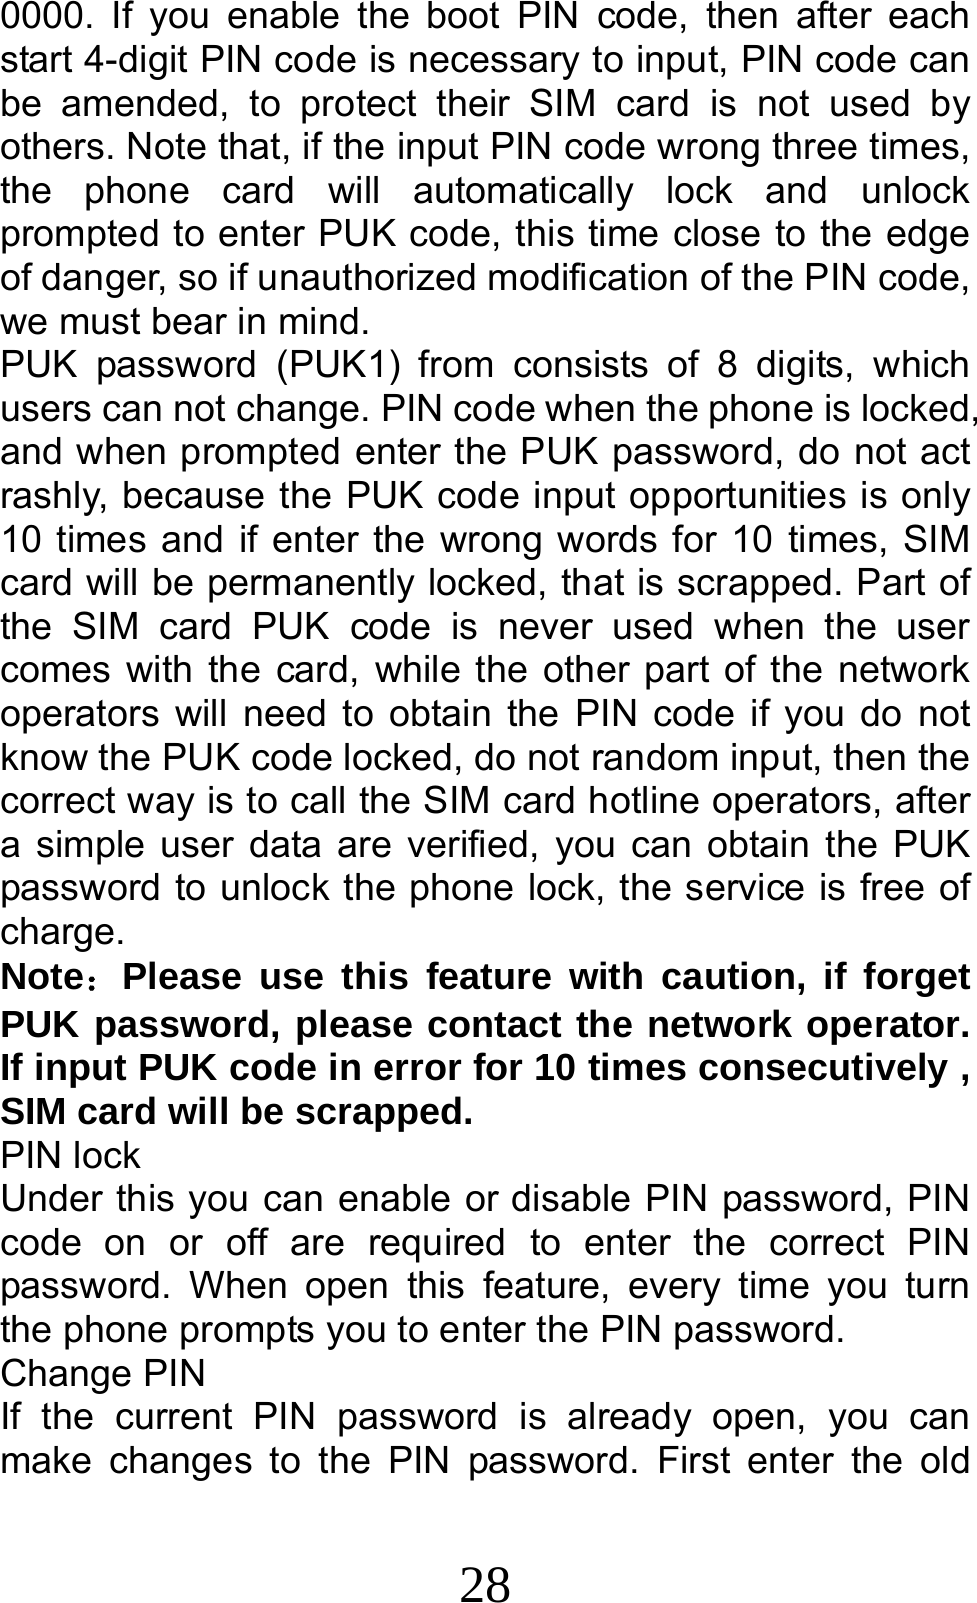 28 0000. If you enable the boot PIN code, then after each start 4-digit PIN code is necessary to input, PIN code can be amended, to protect their SIM card is not used by others. Note that, if the input PIN code wrong three times, the phone card will automatically lock and unlock prompted to enter PUK code, this time close to the edge of danger, so if unauthorized modification of the PIN code, we must bear in mind.   PUK password (PUK1) from consists of 8 digits, which users can not change. PIN code when the phone is locked, and when prompted enter the PUK password, do not act rashly, because the PUK code input opportunities is only 10 times and if enter the wrong words for 10 times, SIM card will be permanently locked, that is scrapped. Part of the SIM card PUK code is never used when the user comes with the card, while the other part of the network operators will need to obtain the PIN code if you do not know the PUK code locked, do not random input, then the correct way is to call the SIM card hotline operators, after a simple user data are verified, you can obtain the PUK password to unlock the phone lock, the service is free of charge. Note：Please use this feature with caution, if forget PUK password, please contact the network operator. If input PUK code in error for 10 times consecutively , SIM card will be scrapped. PIN lock Under this you can enable or disable PIN password, PIN code on or off are required to enter the correct PIN password. When open this feature, every time you turn the phone prompts you to enter the PIN password. Change PIN If the current PIN password is already open, you can make changes to the PIN password. First enter the old 